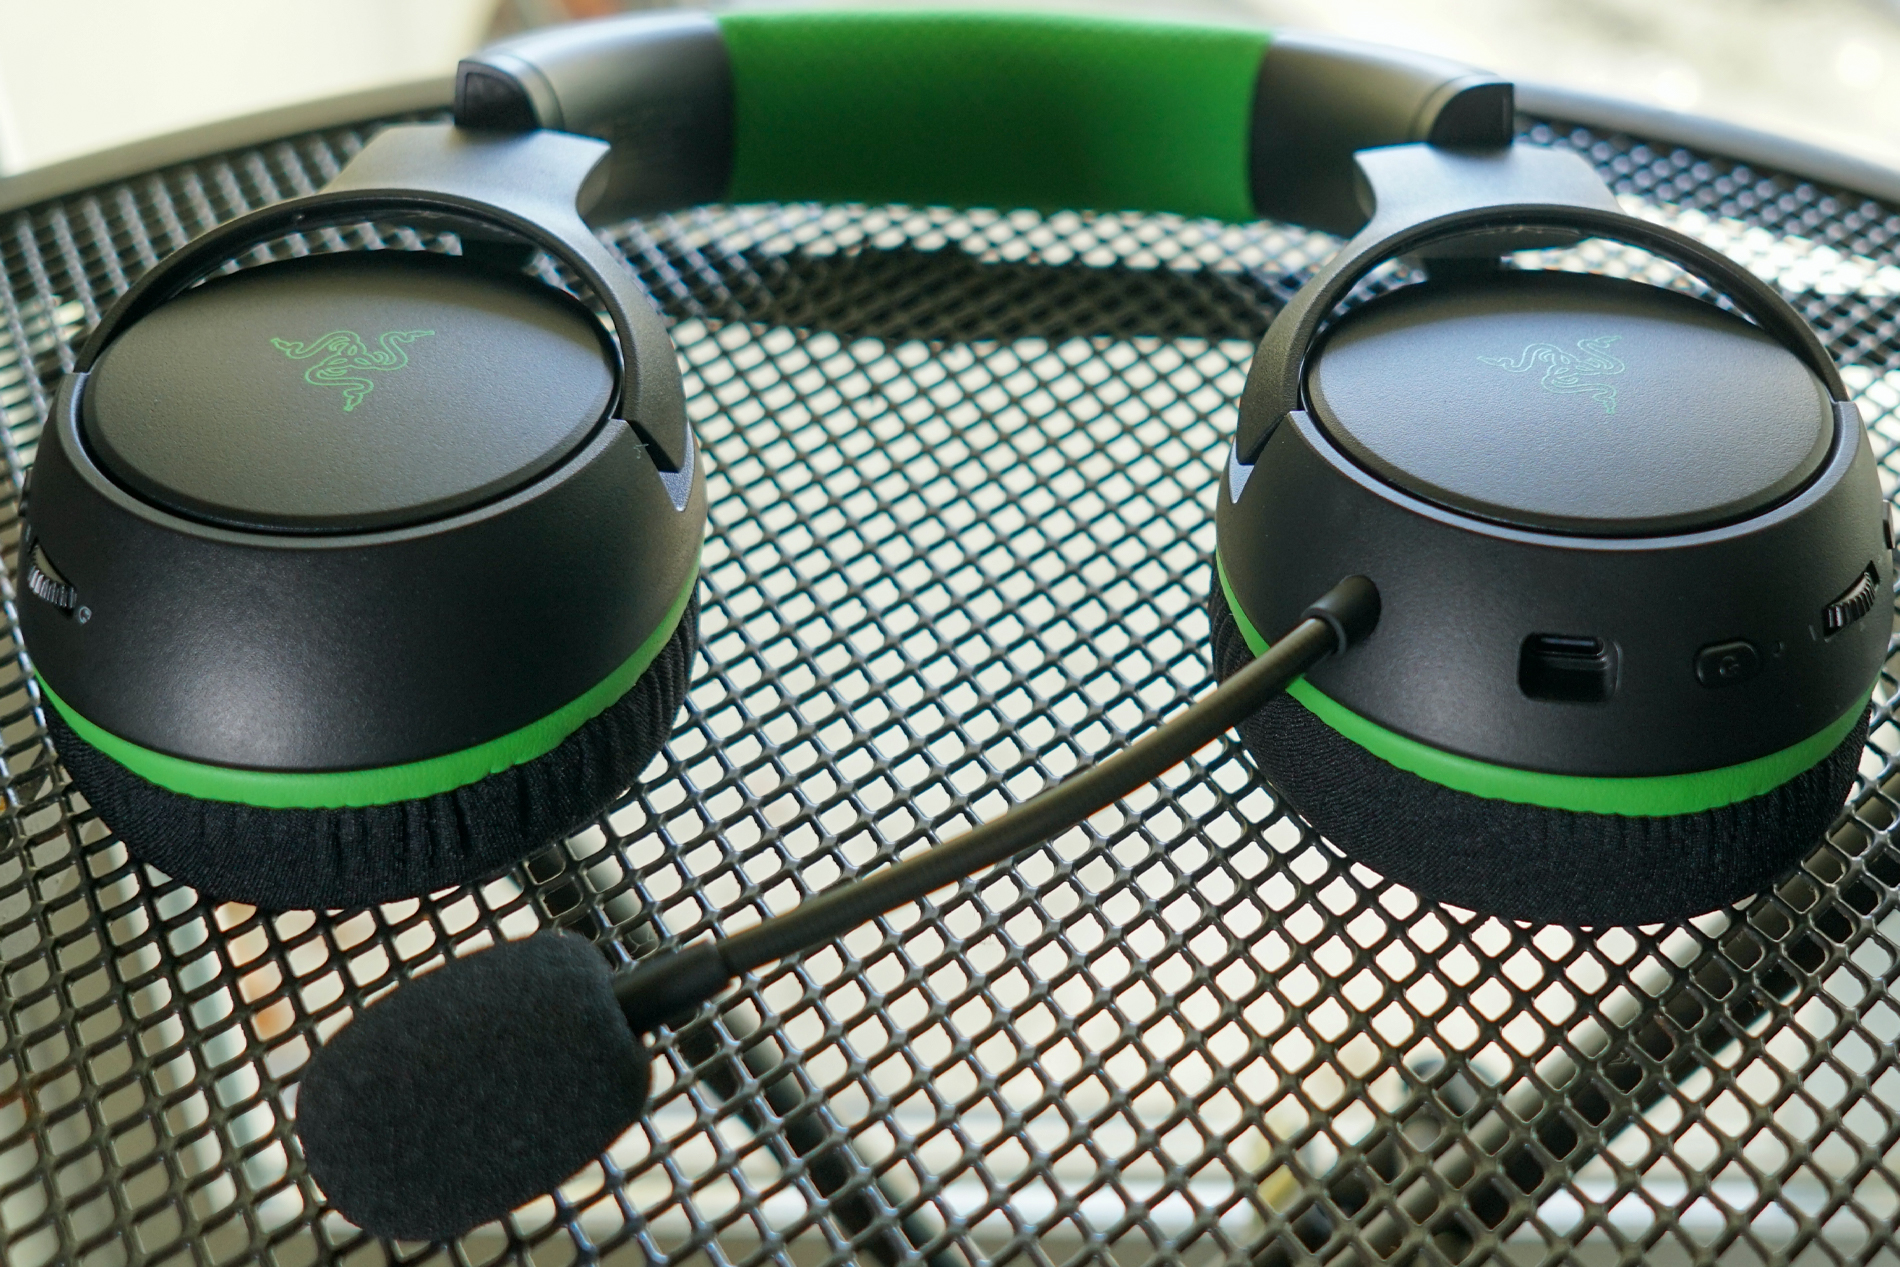 The Razer Kaira Wireless lays flat on a wireframe table displaying its controls and charging port.